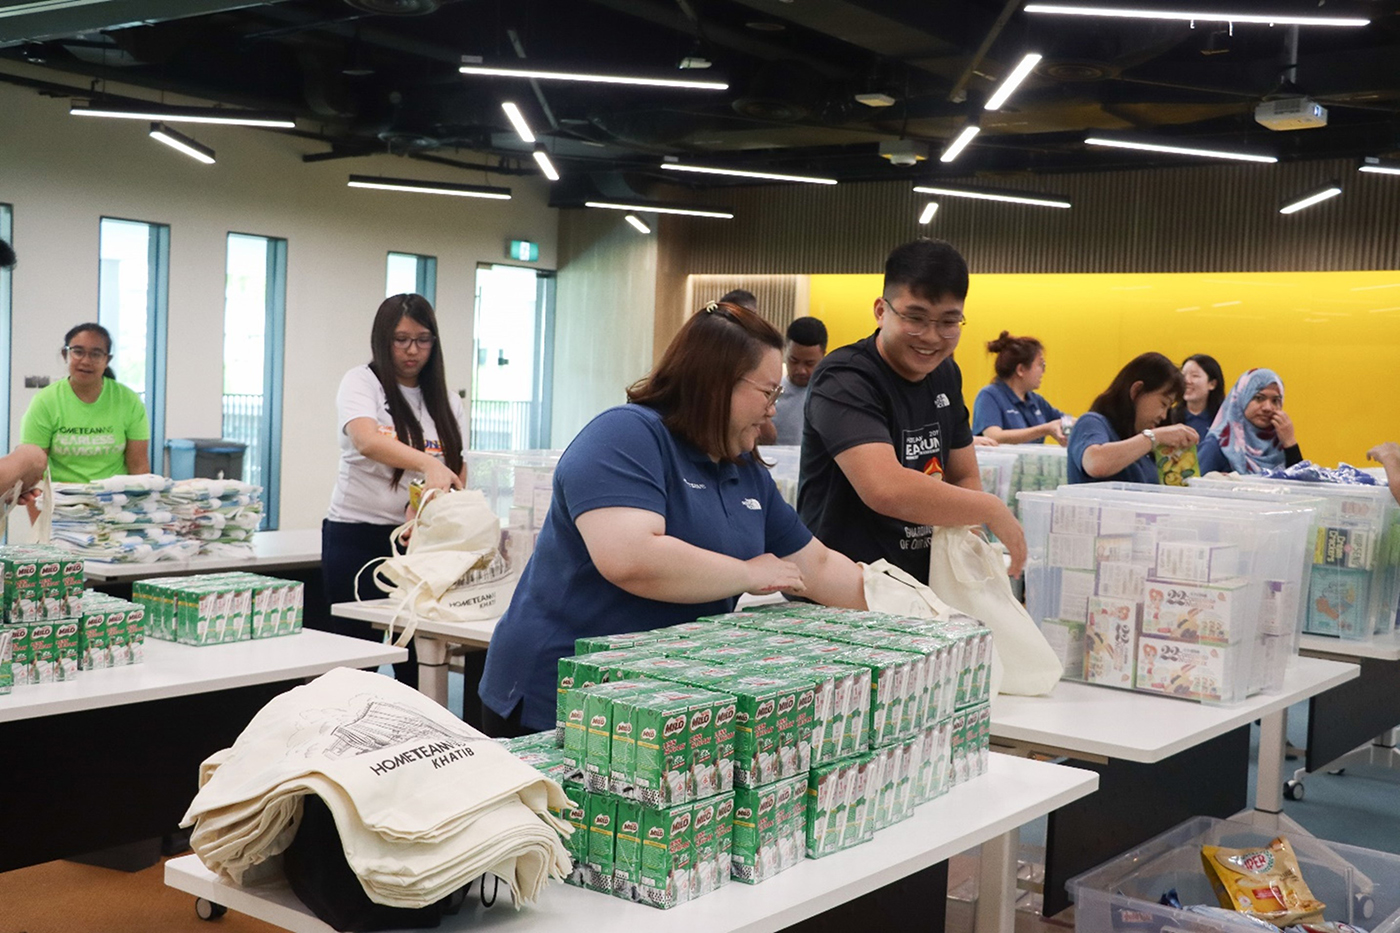 HomeTeamNS staff preparing care packages that were distributed to Yishun residents under the SWAMI Home Help Programme.